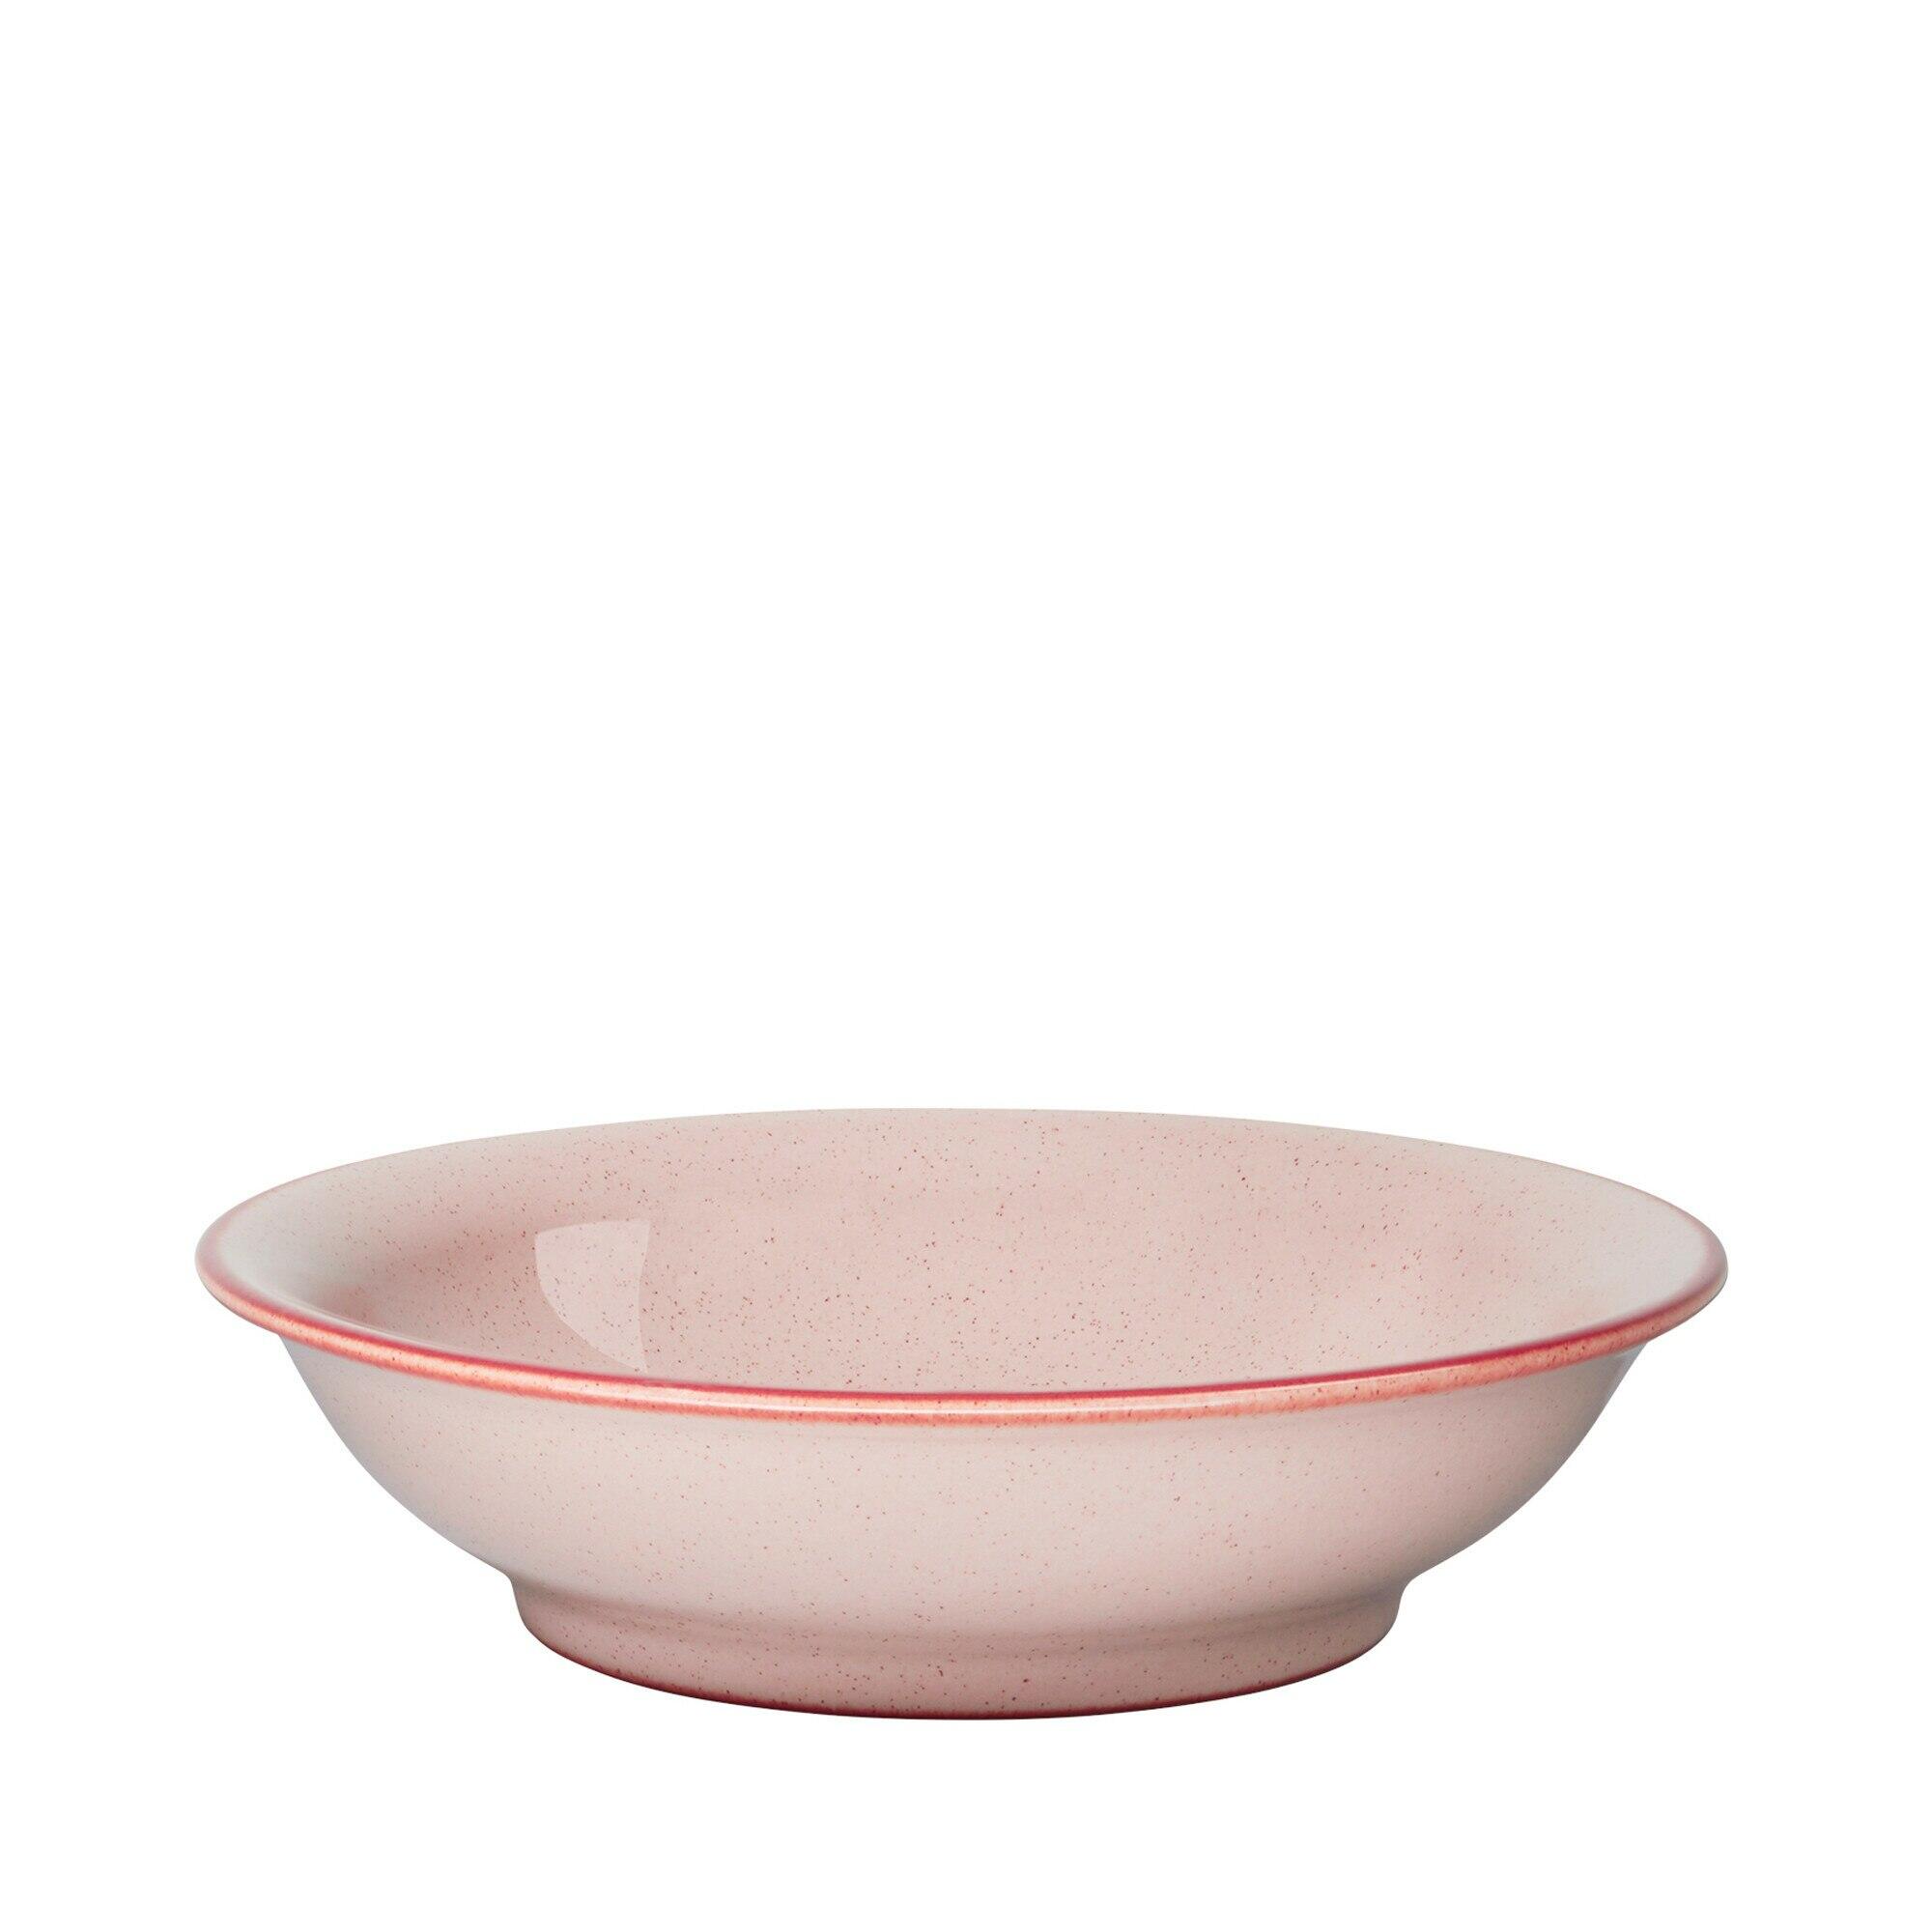 Heritage Piazza Large Shallow Bowl